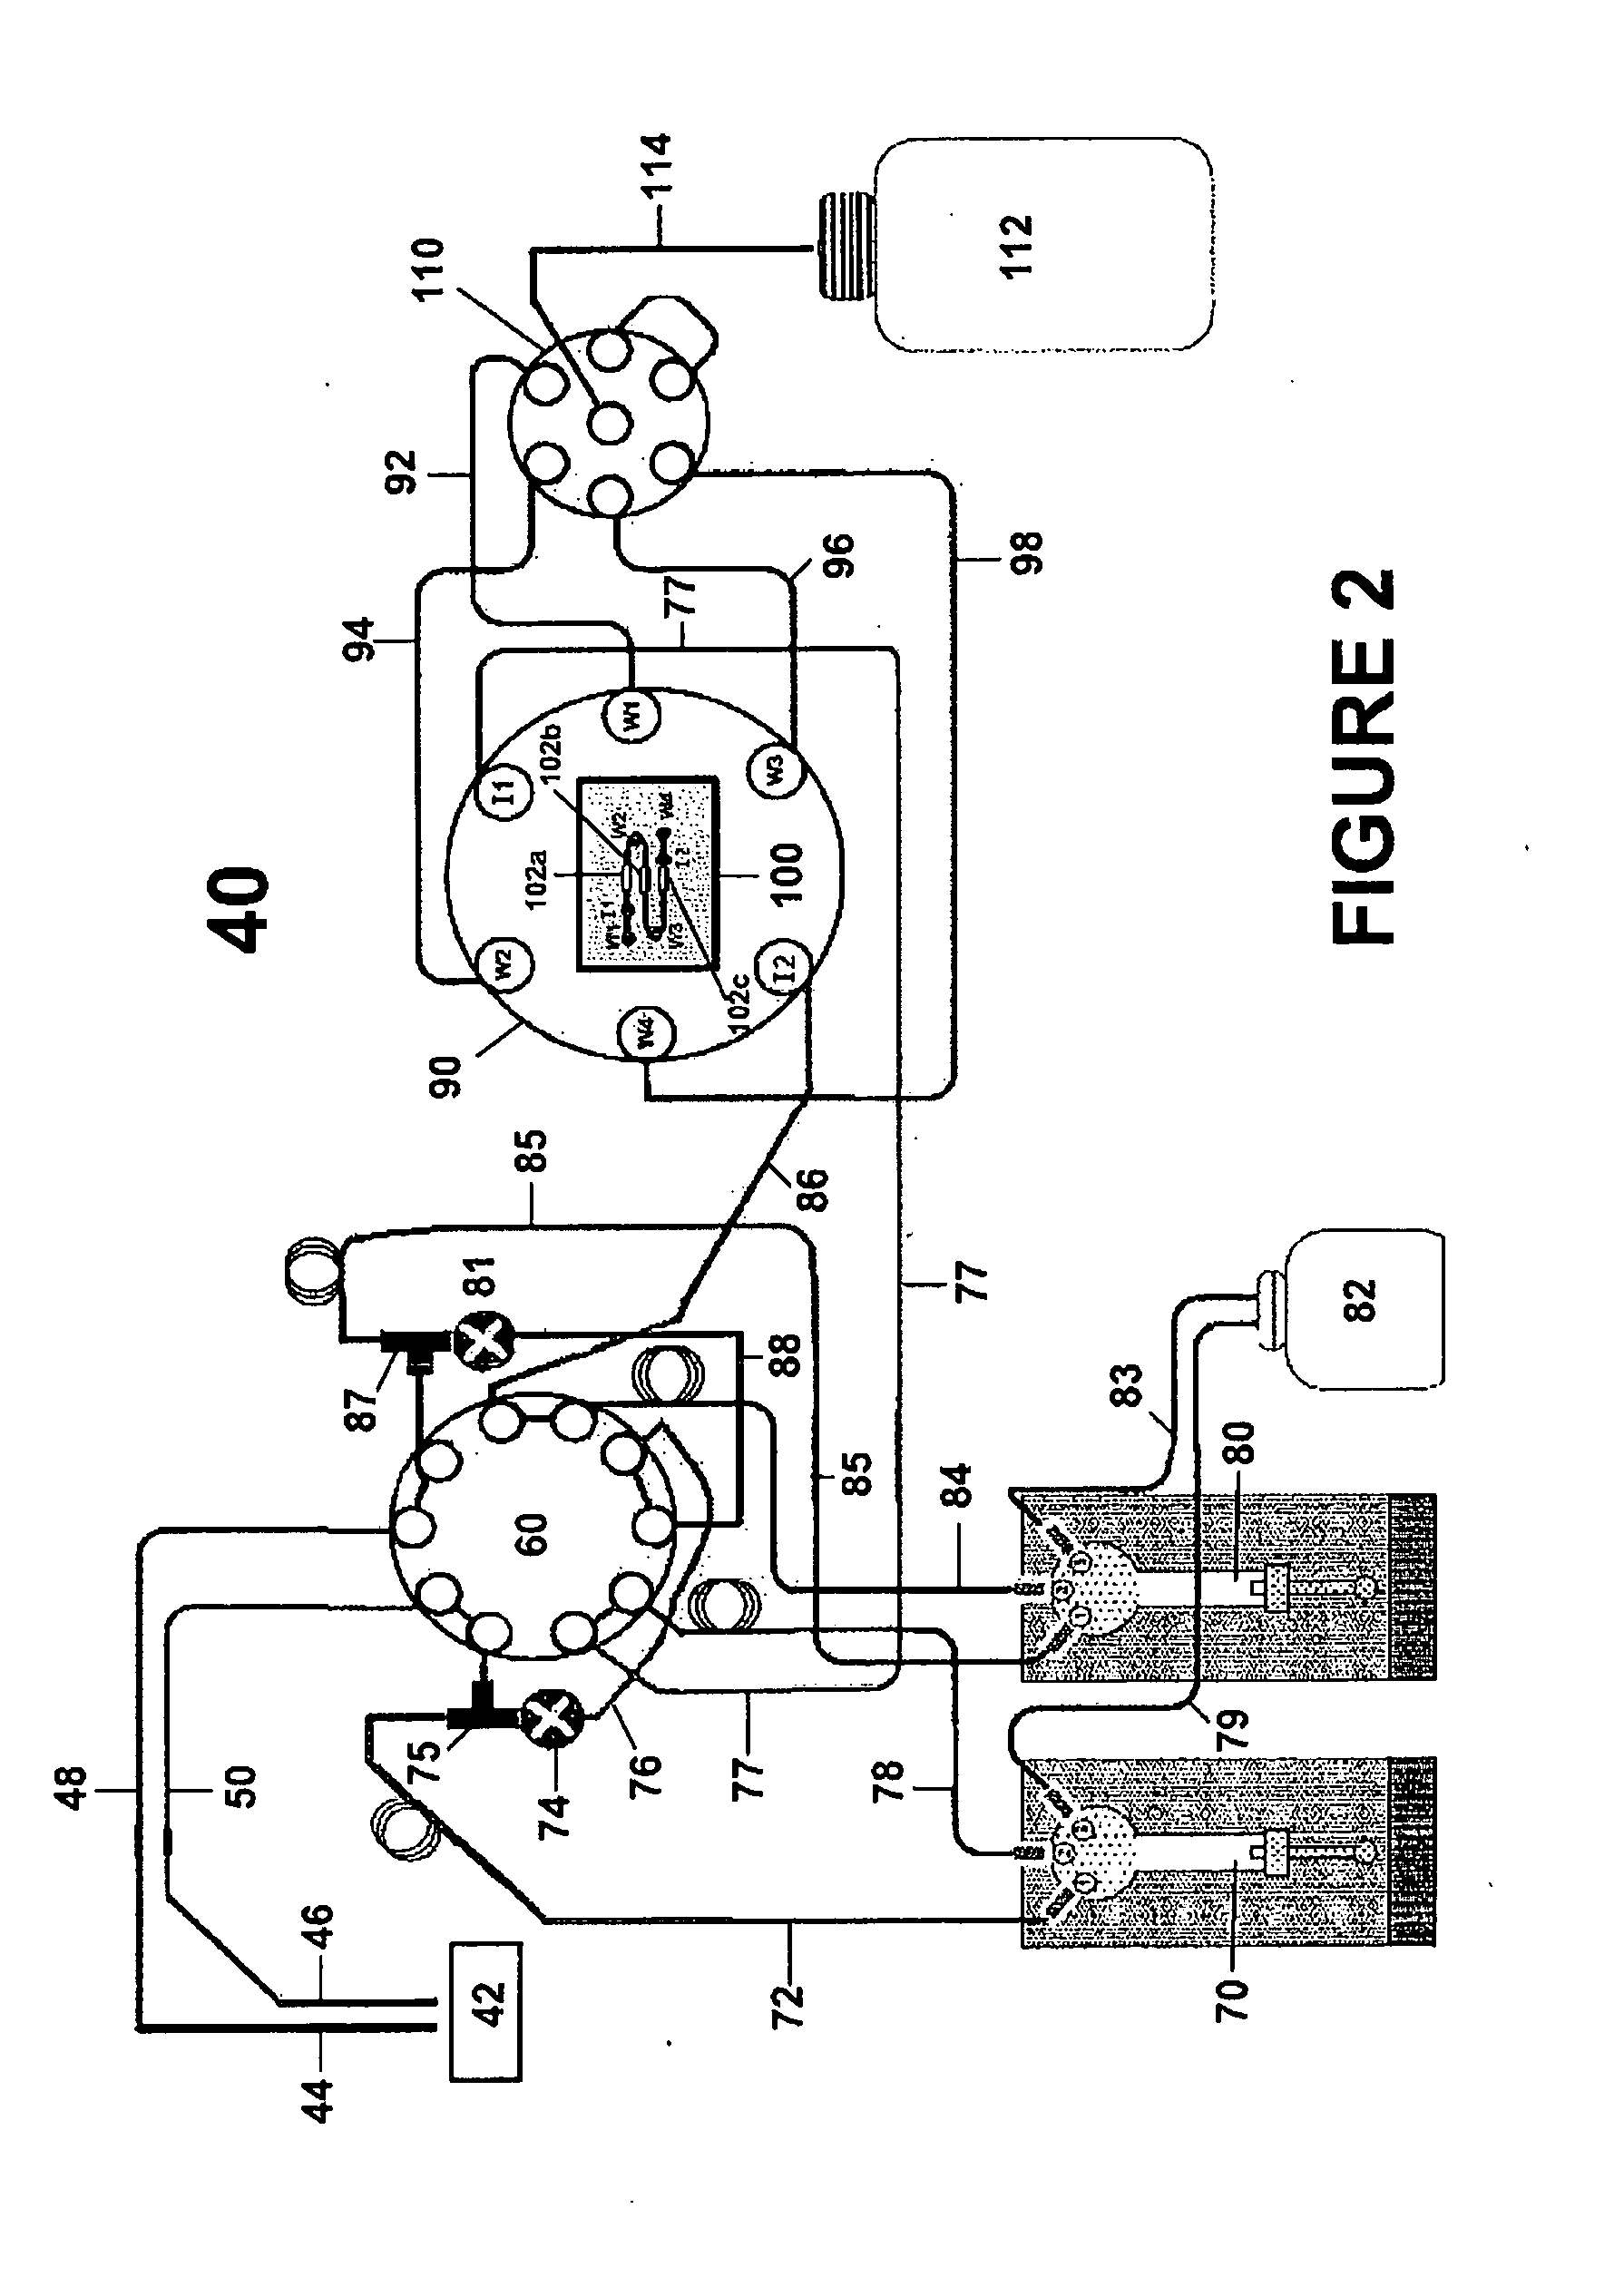 In situ-dilution method and system for measuring molecular and chemical interactions